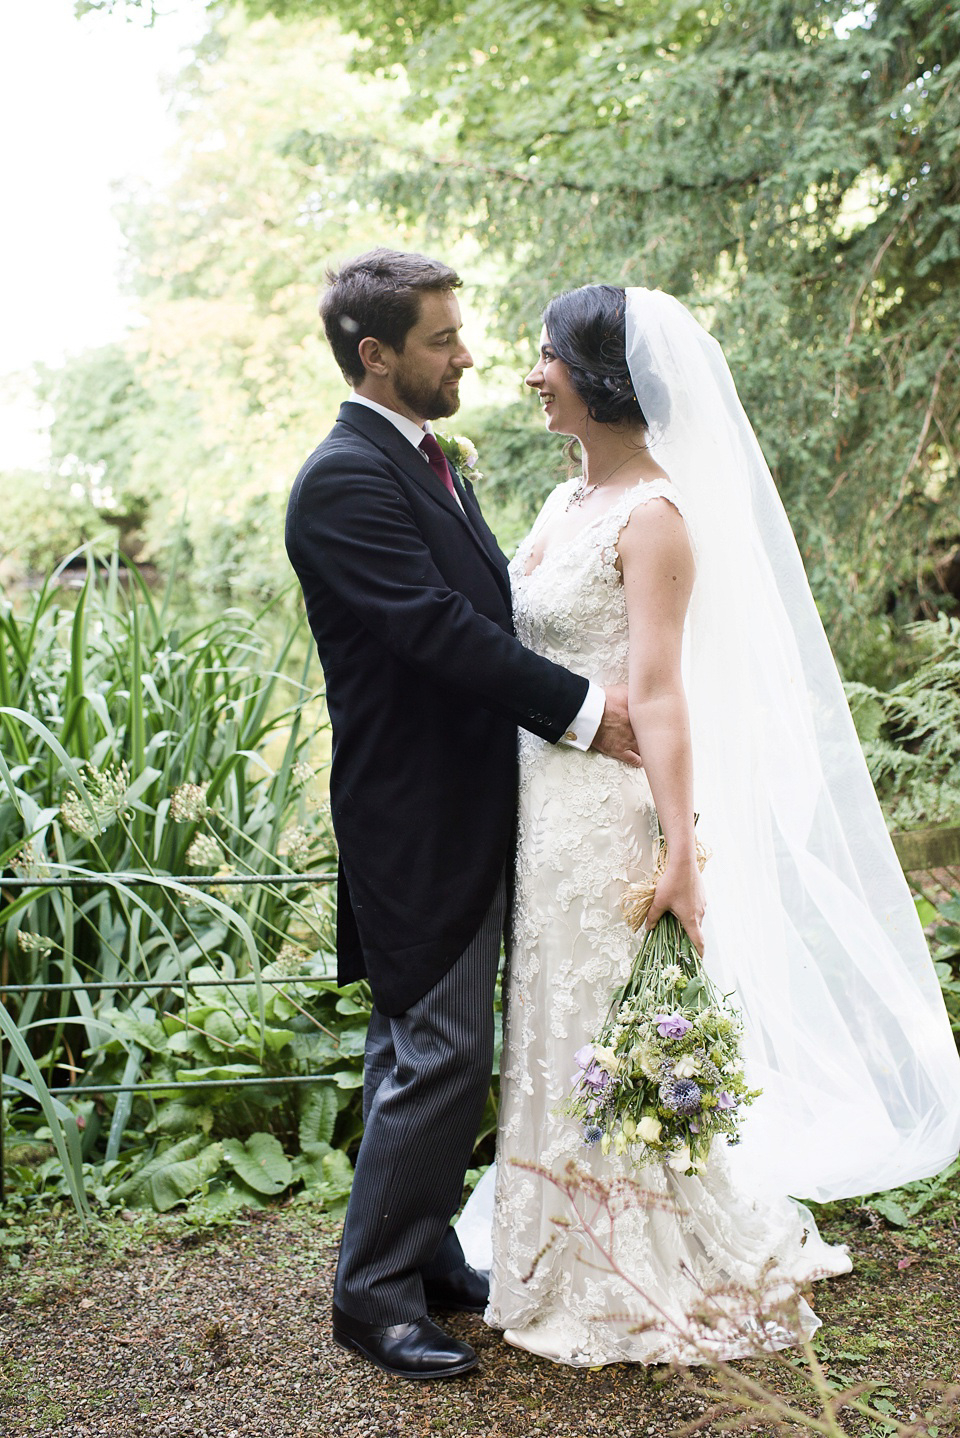 A Handmade and Rustic, French Garden Party Inspired Wedding | Love My ...